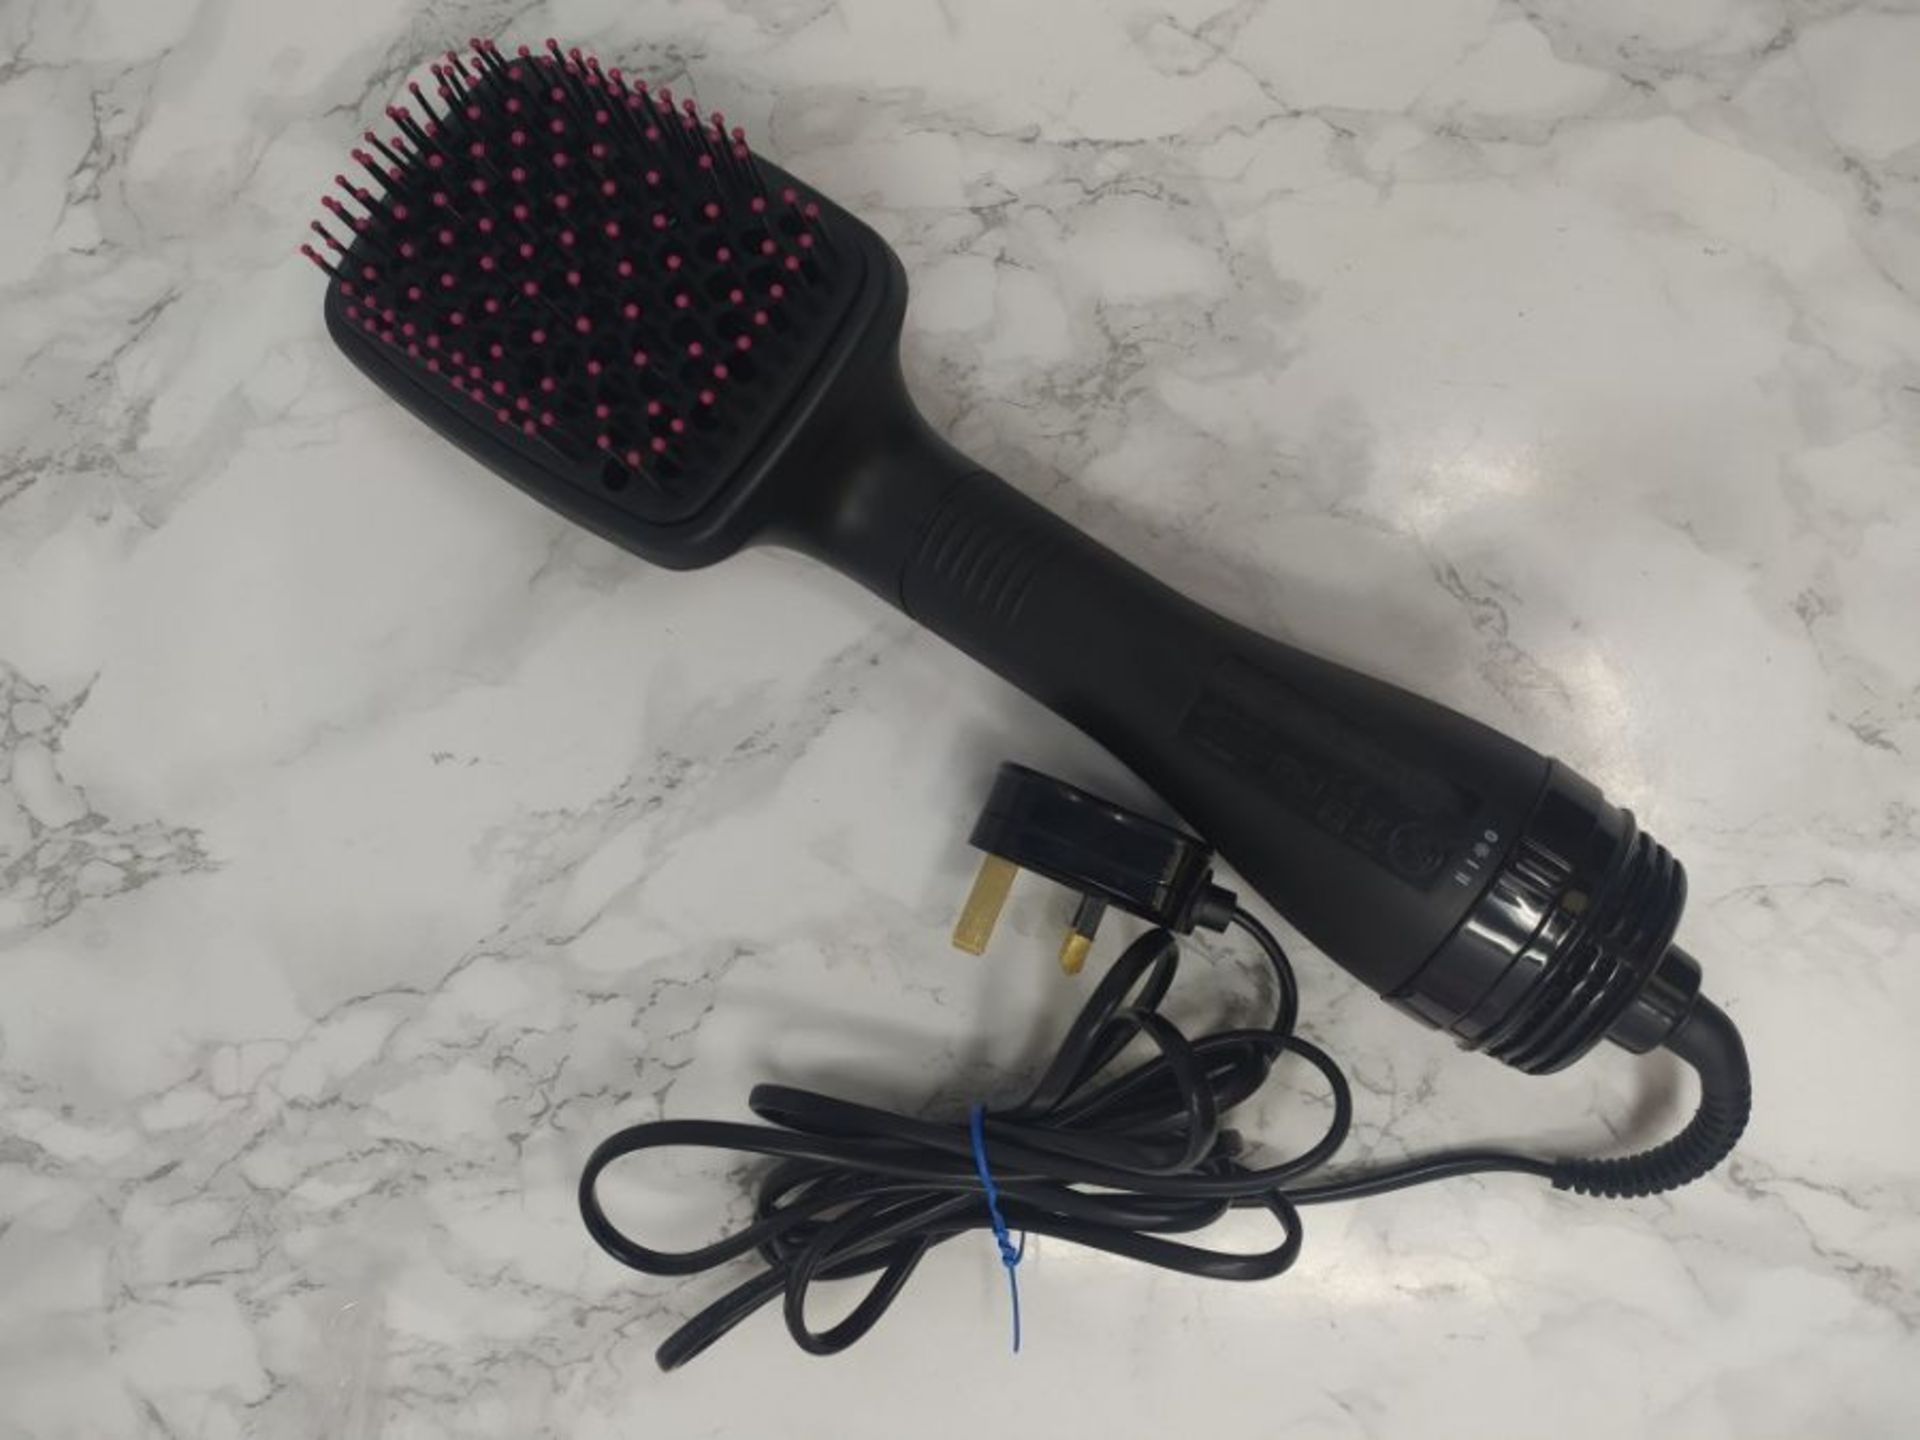 REVLON Pro Collection Salon One Step Hair Dryer and Styler - Image 3 of 3